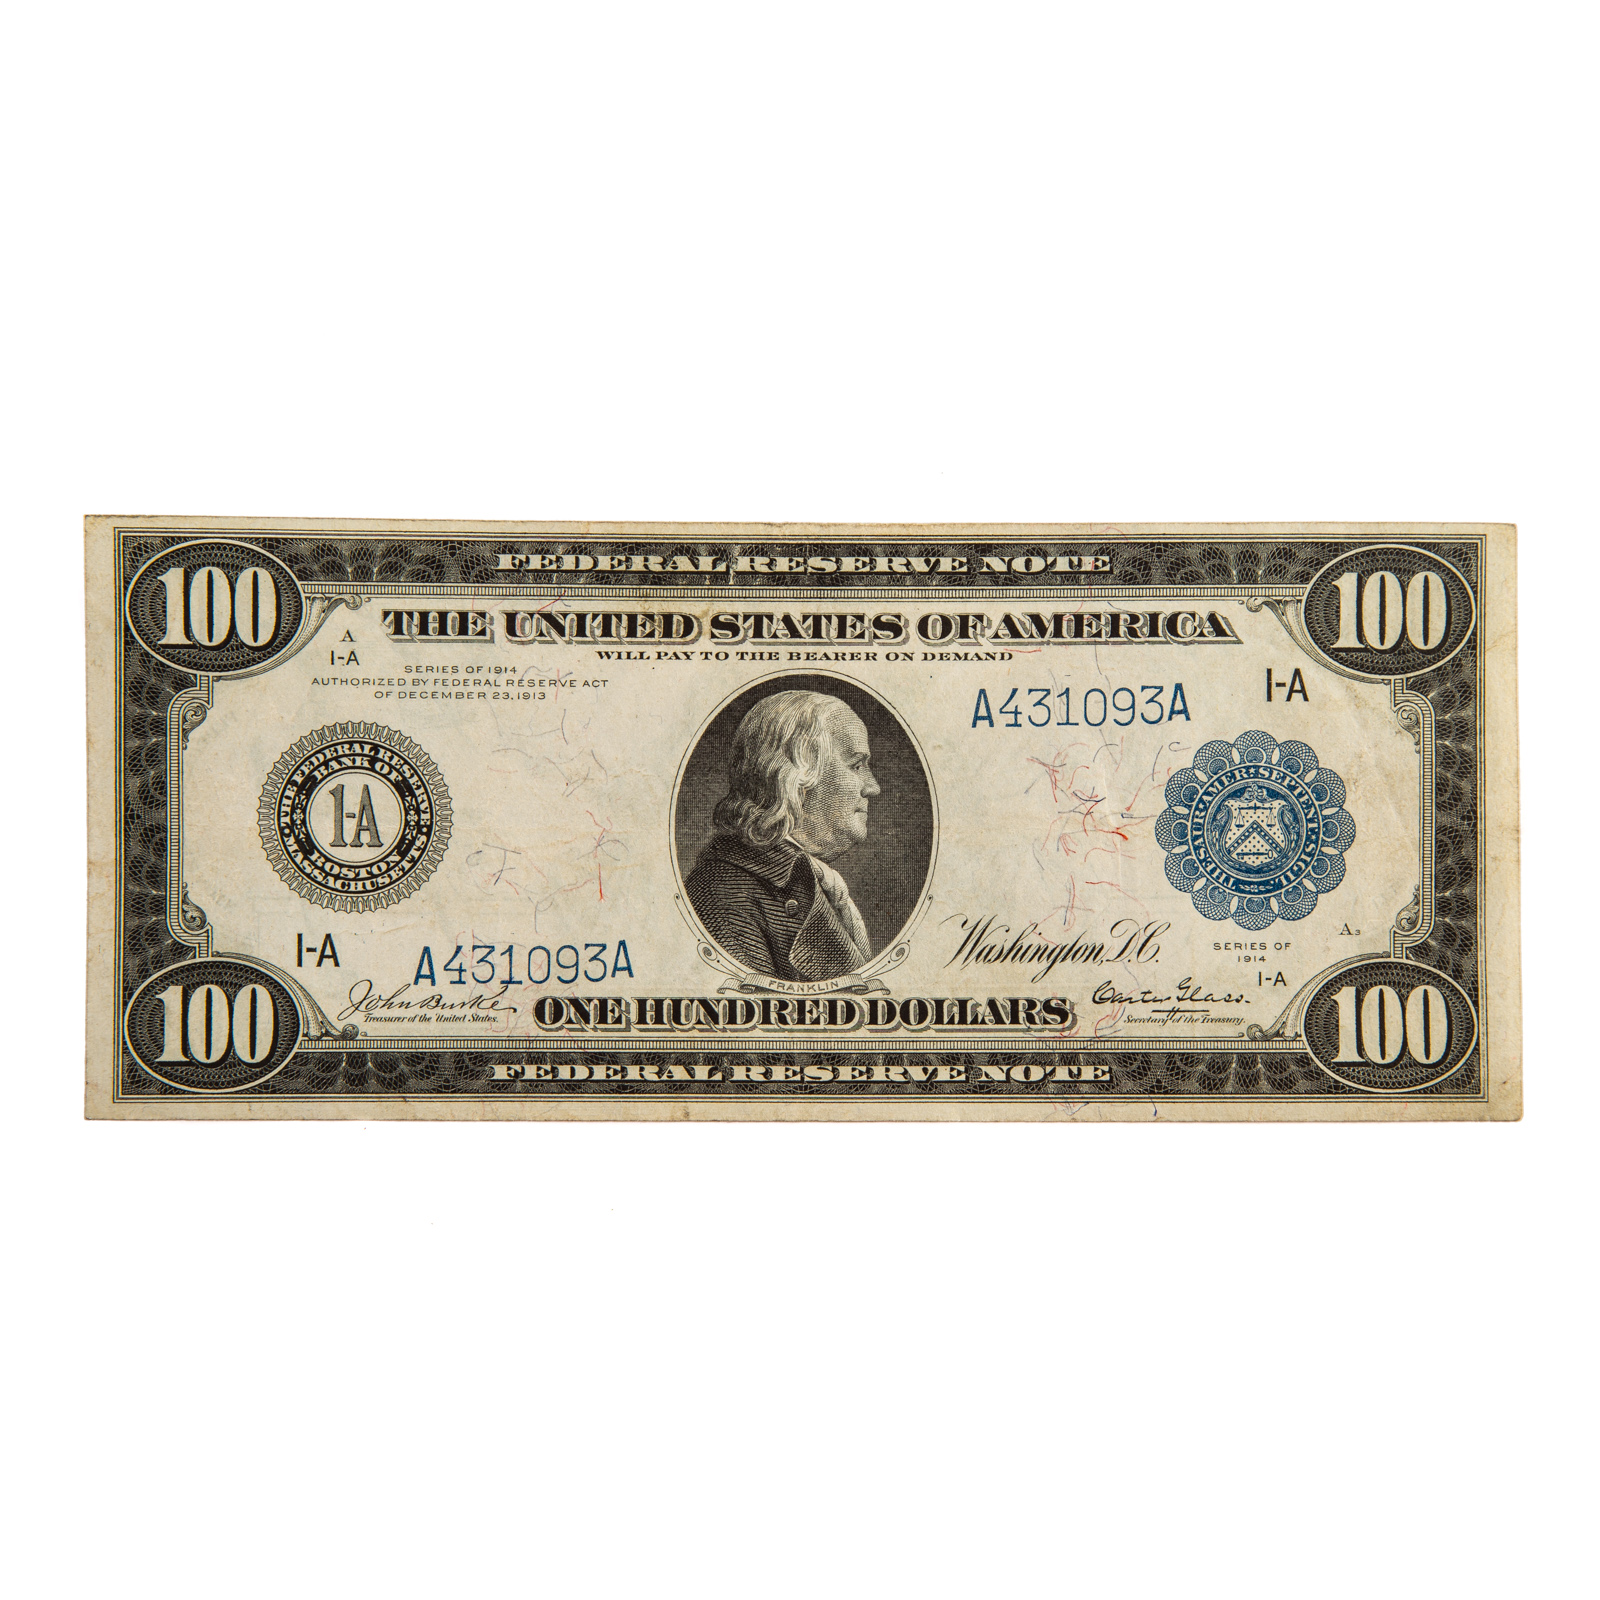  100 1914 FEDERAL RESERVE NOTE  335945